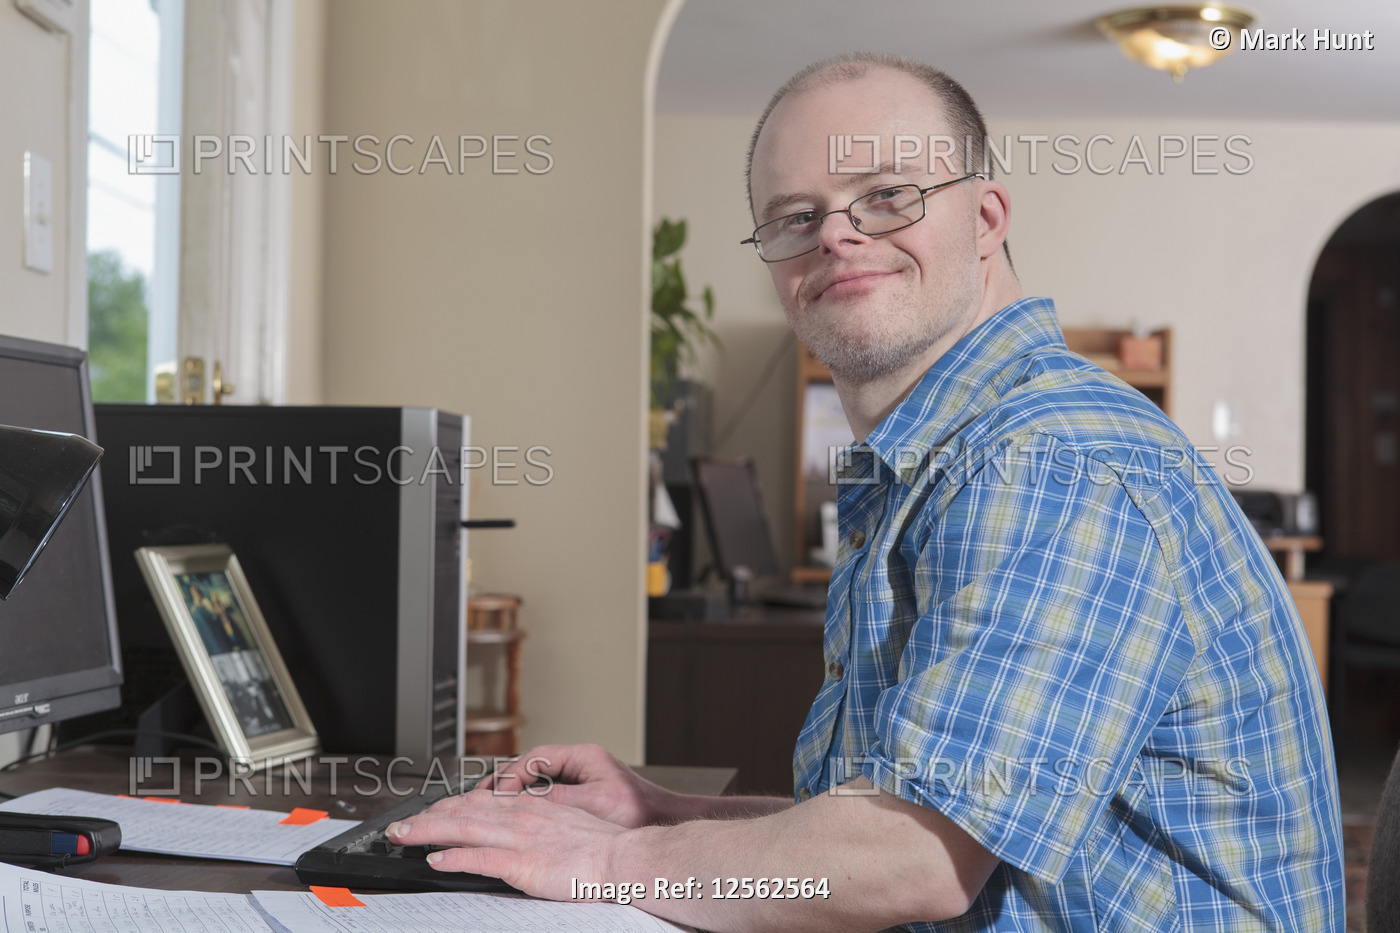 Man with Down Syndrome working at a computer in an office